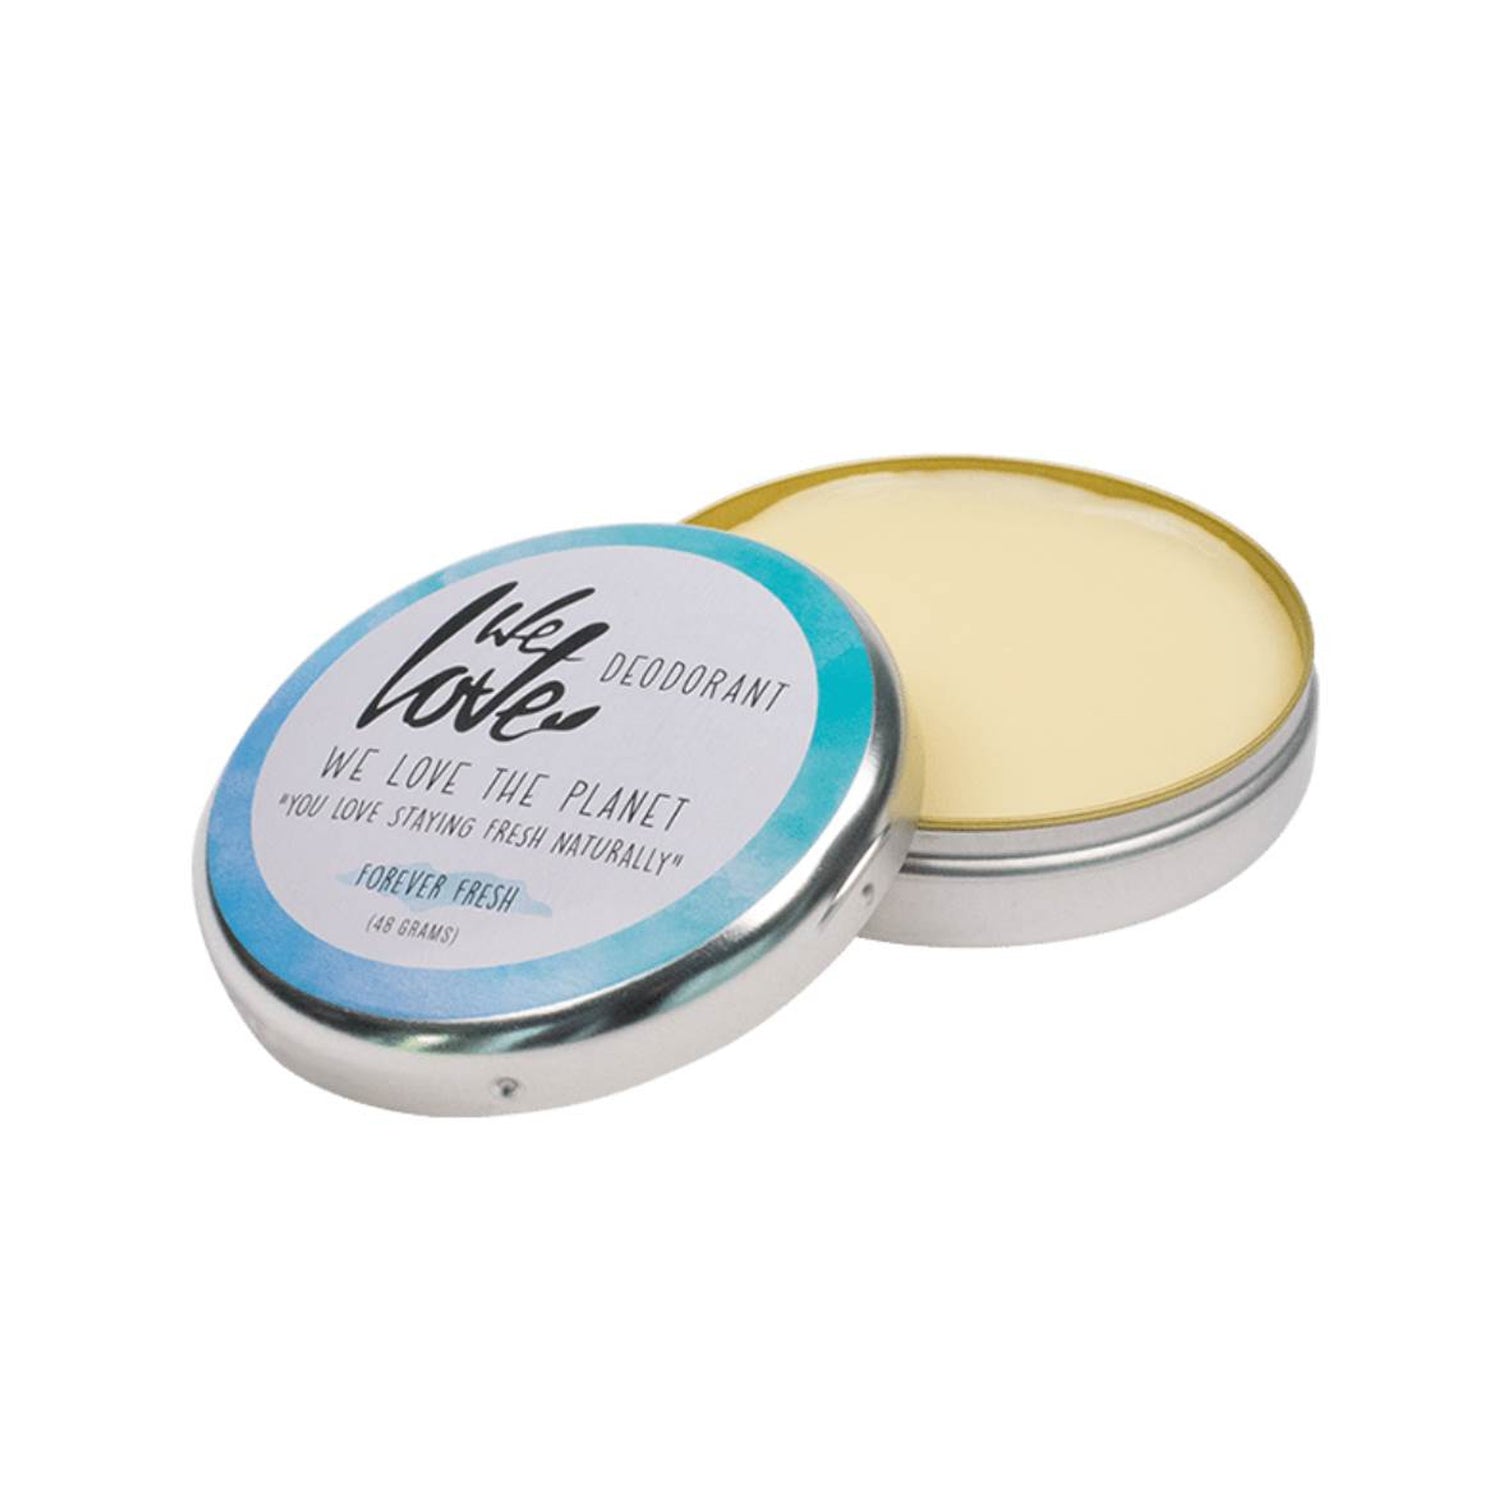 We Love The Planet Natural Deodorant - Forever Fresh 48g (Tin)